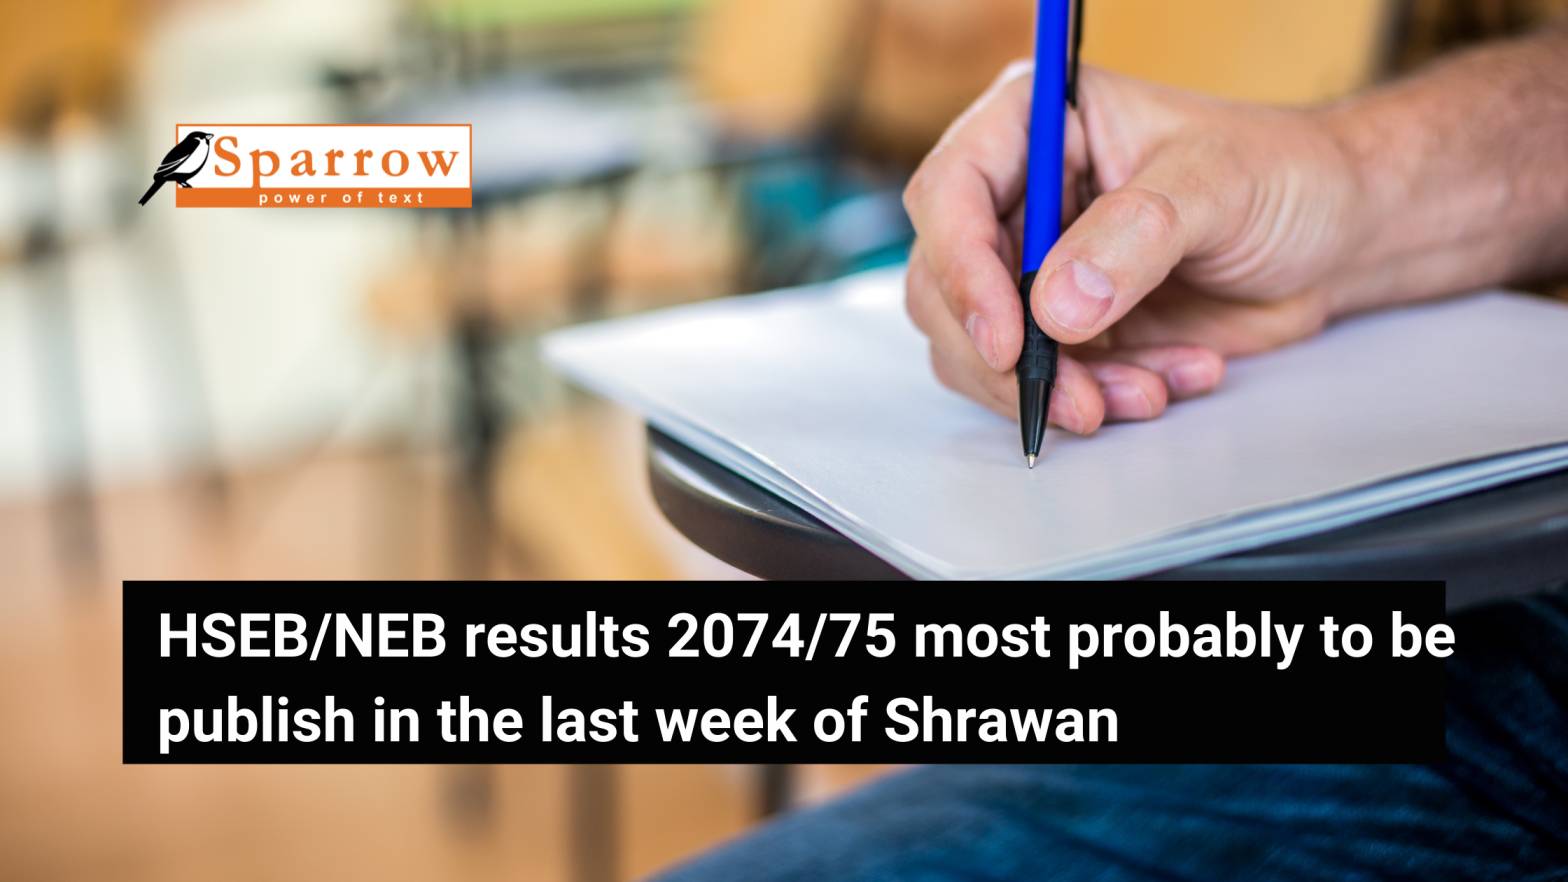 HSEB/NEB results 2074/75 to be publish in the last week of Shrawan